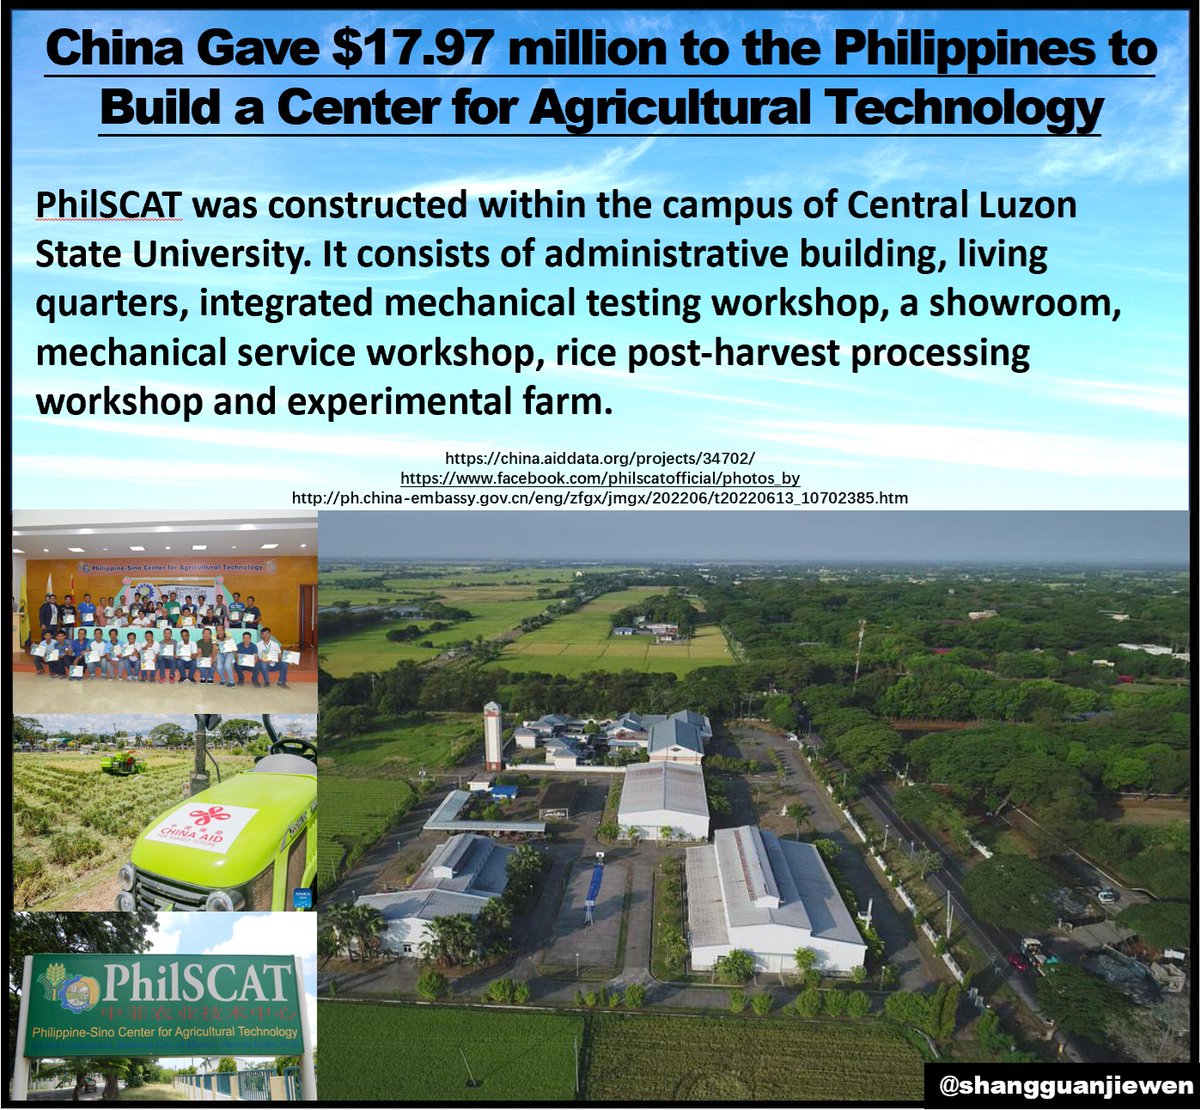 China gives annual scholarships to students study at China's universities, many from the Philippines get scholarships to study agriculture and science.

Many first study at the Chinese funded center for agriculture in the Philippines: PhilSCAT.

#Philippines #BeltandRoad